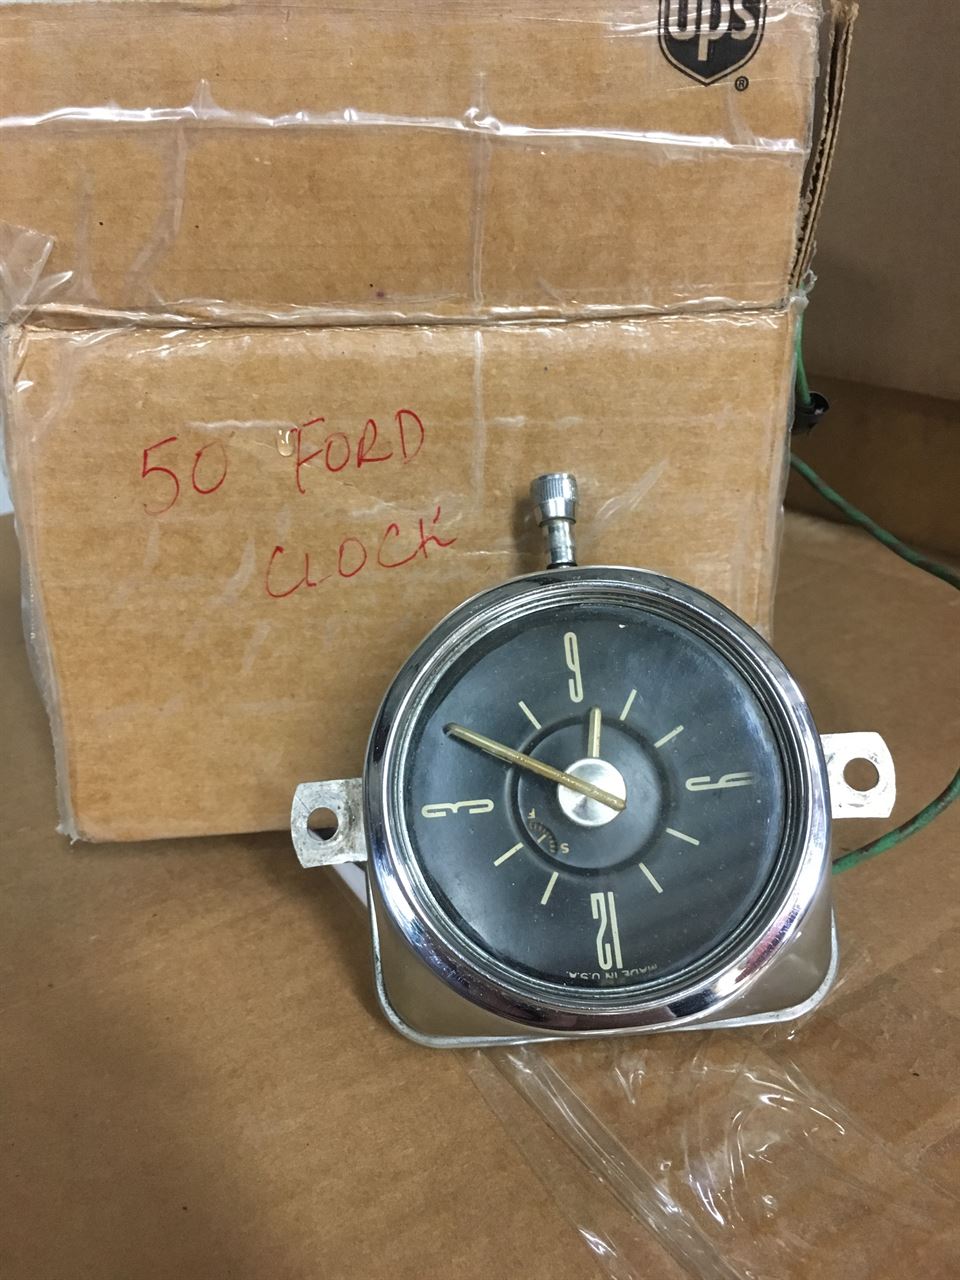 Picture of 1950 Ford Clock